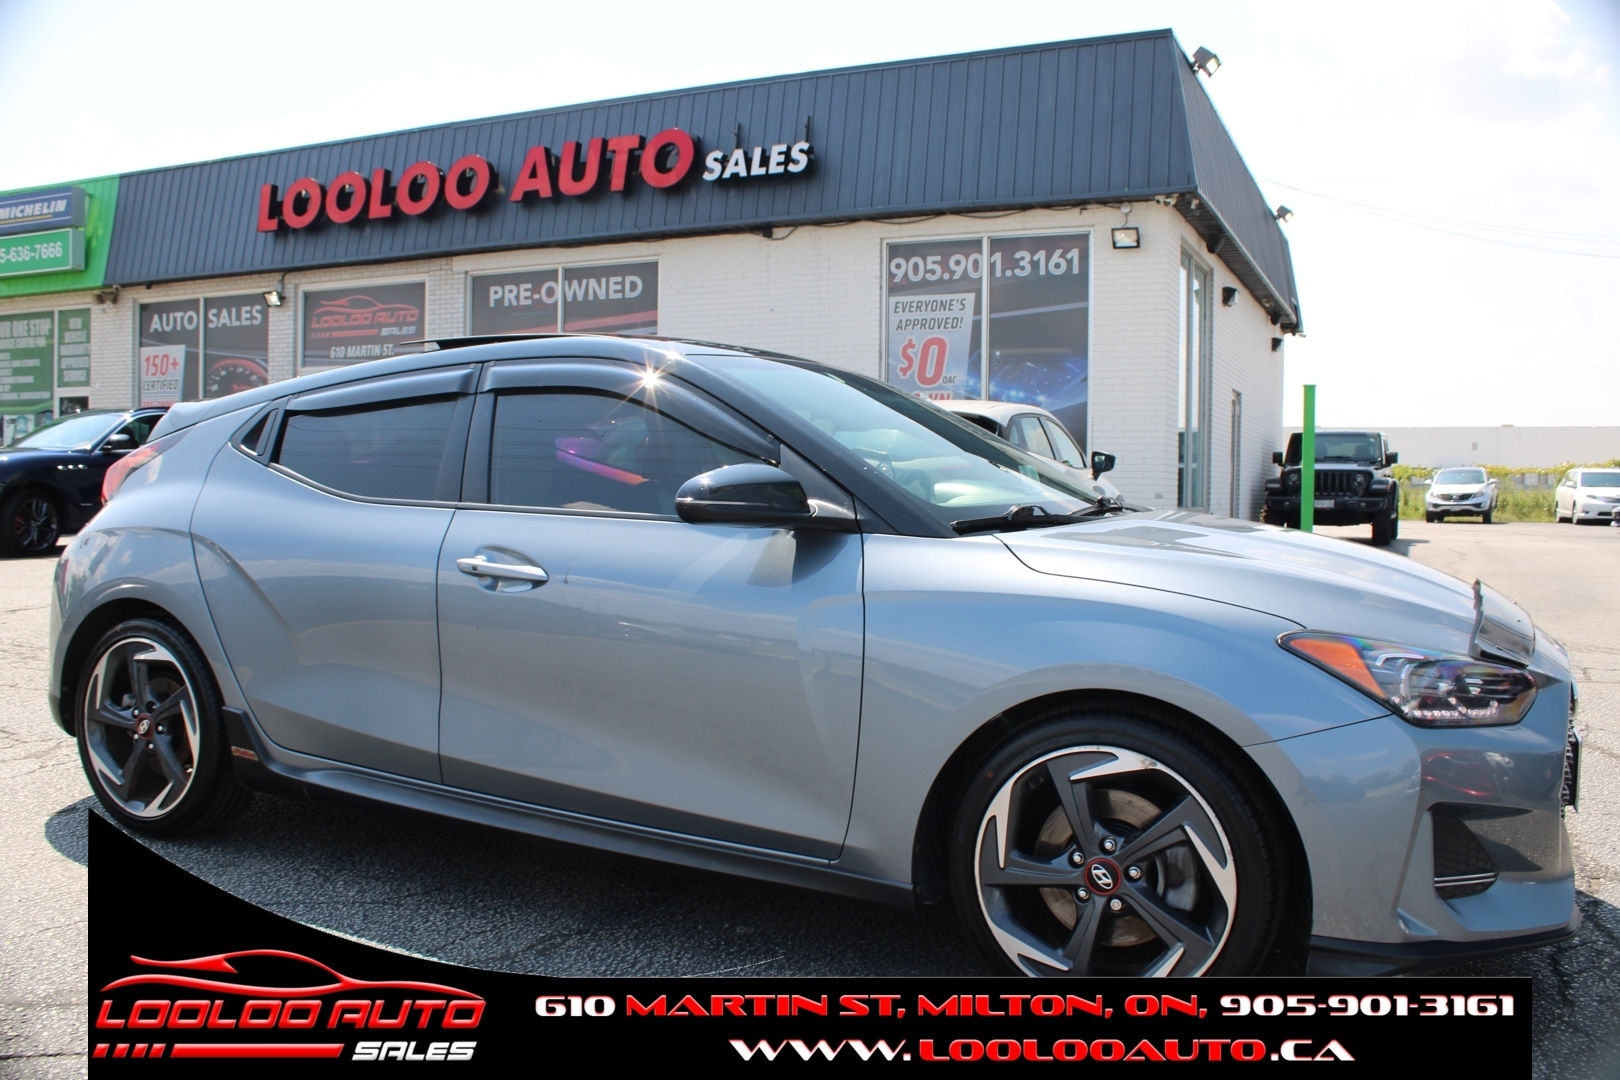 2019 Hyundai Veloster Turbo1.6L R-Spec Heads Up Display $87/Weekly Certi